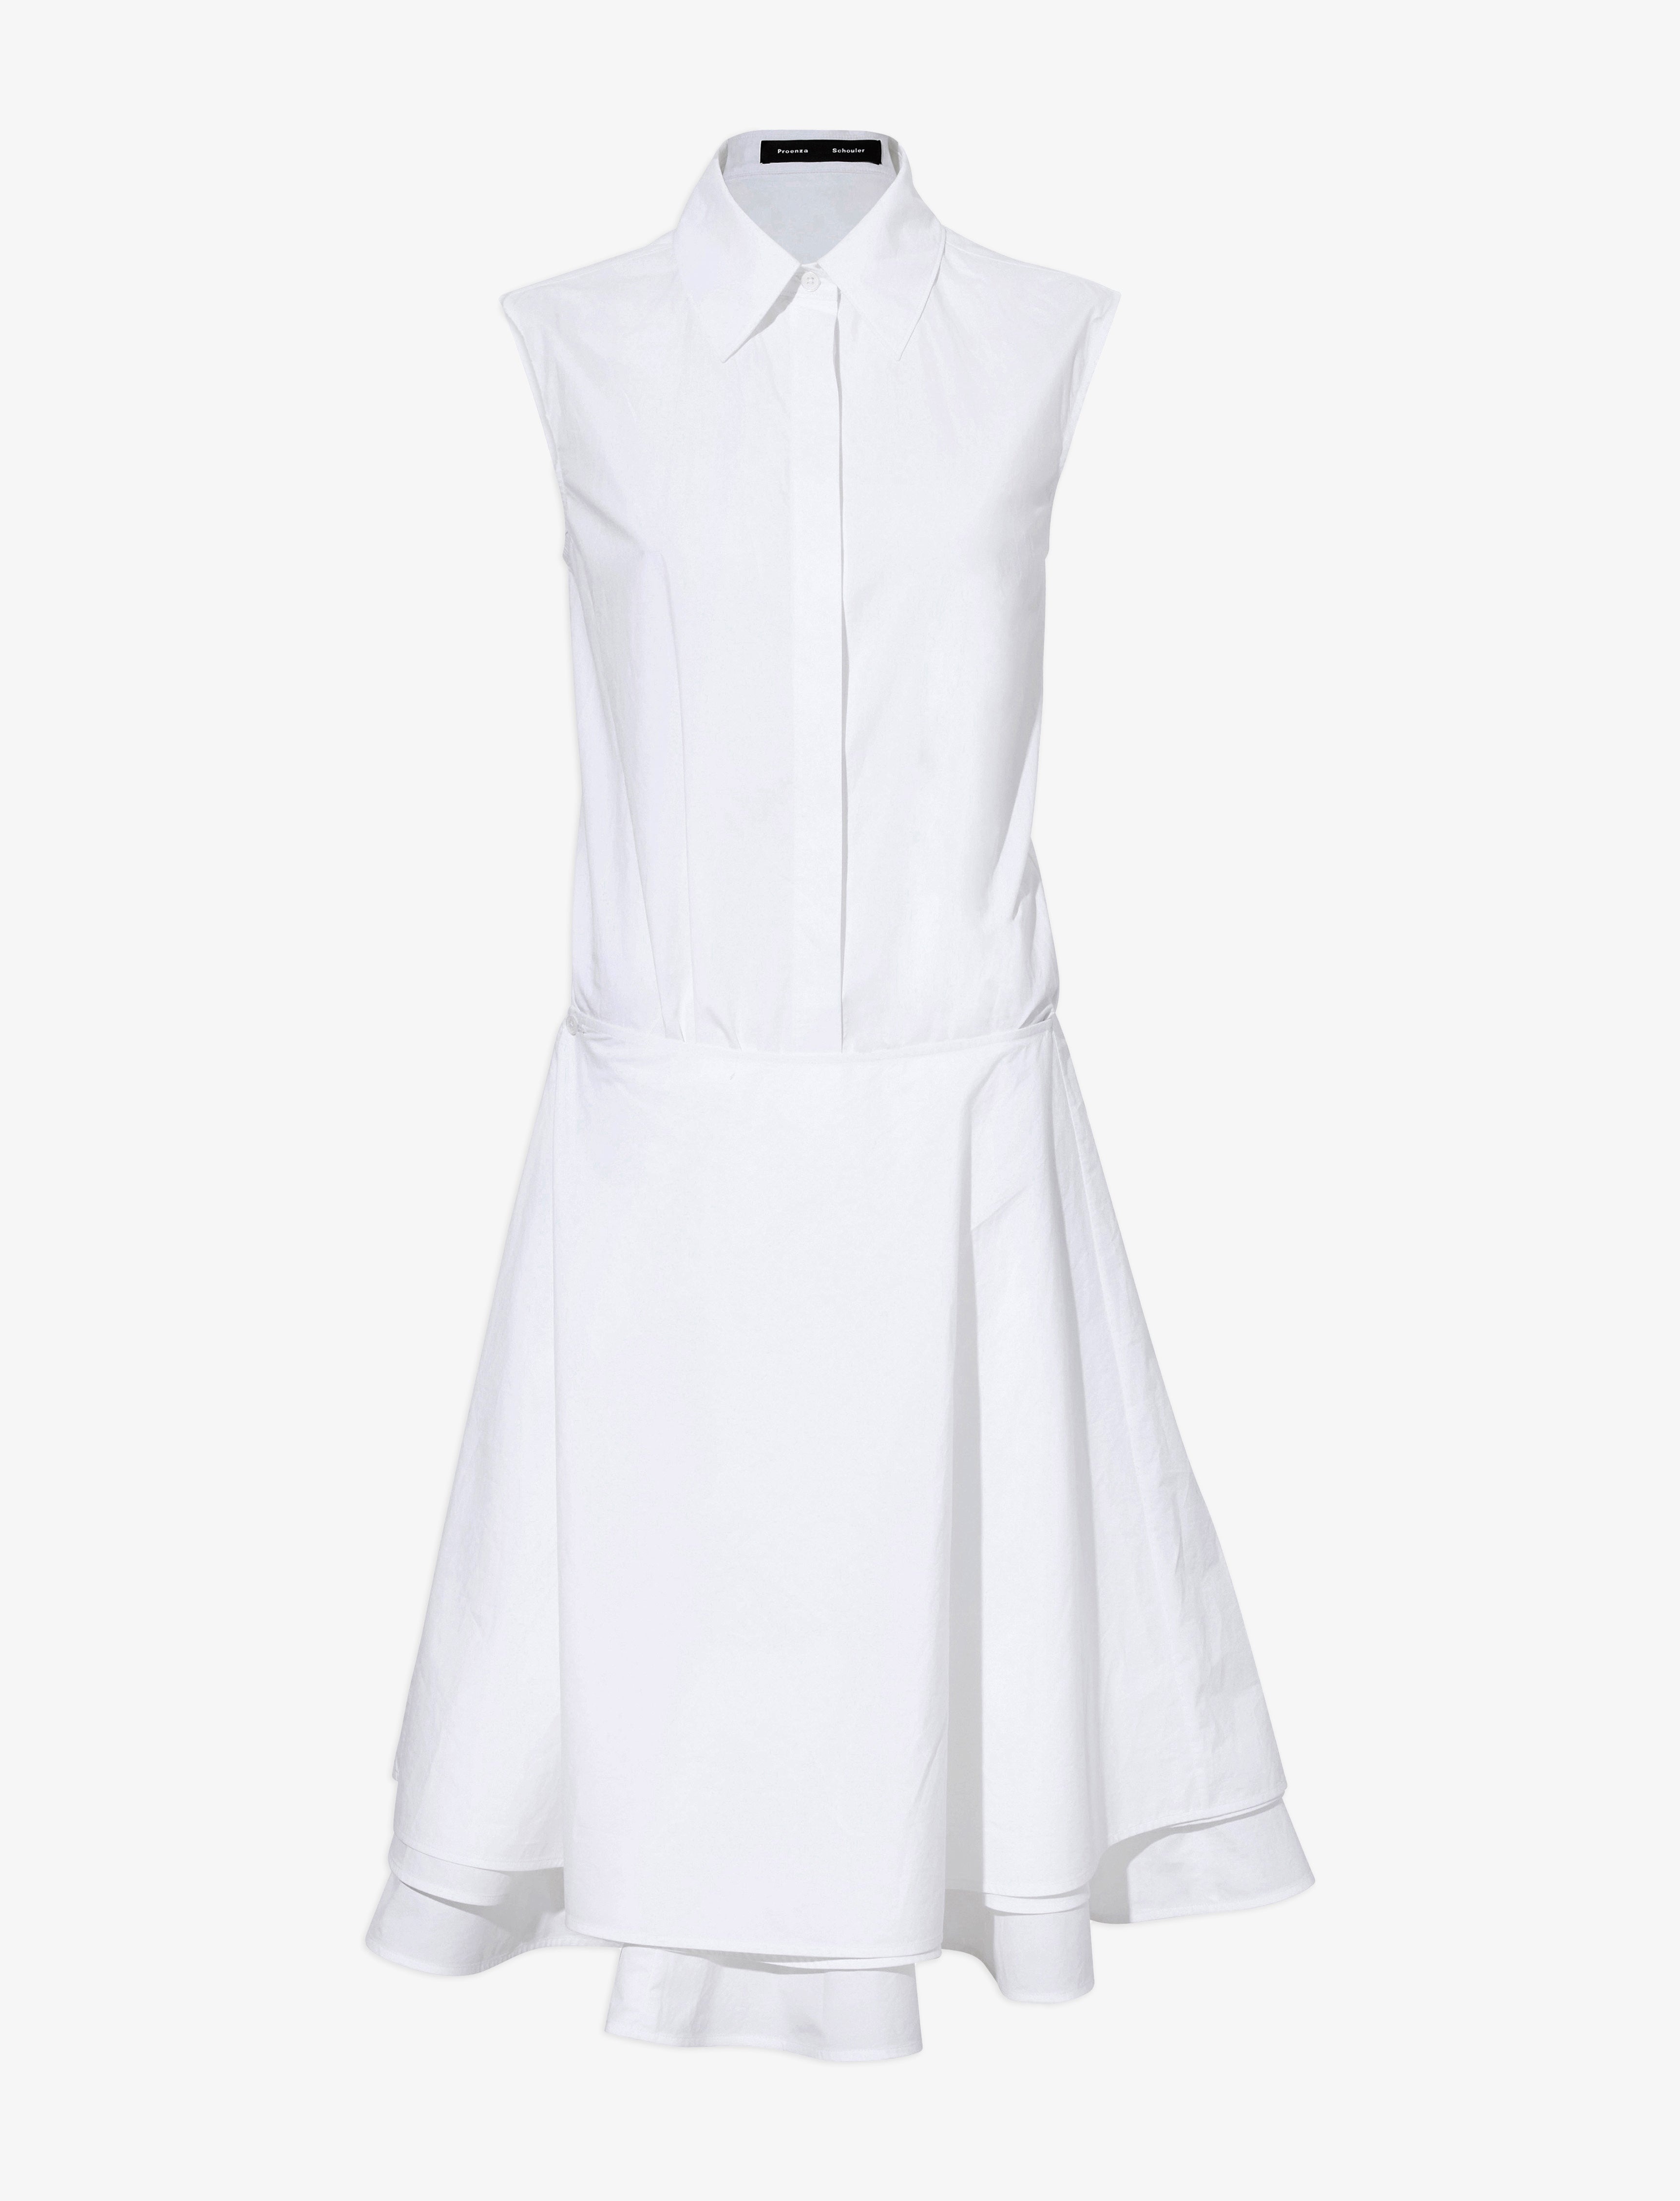 Cindy Dress in Washed Cotton Poplin - 1